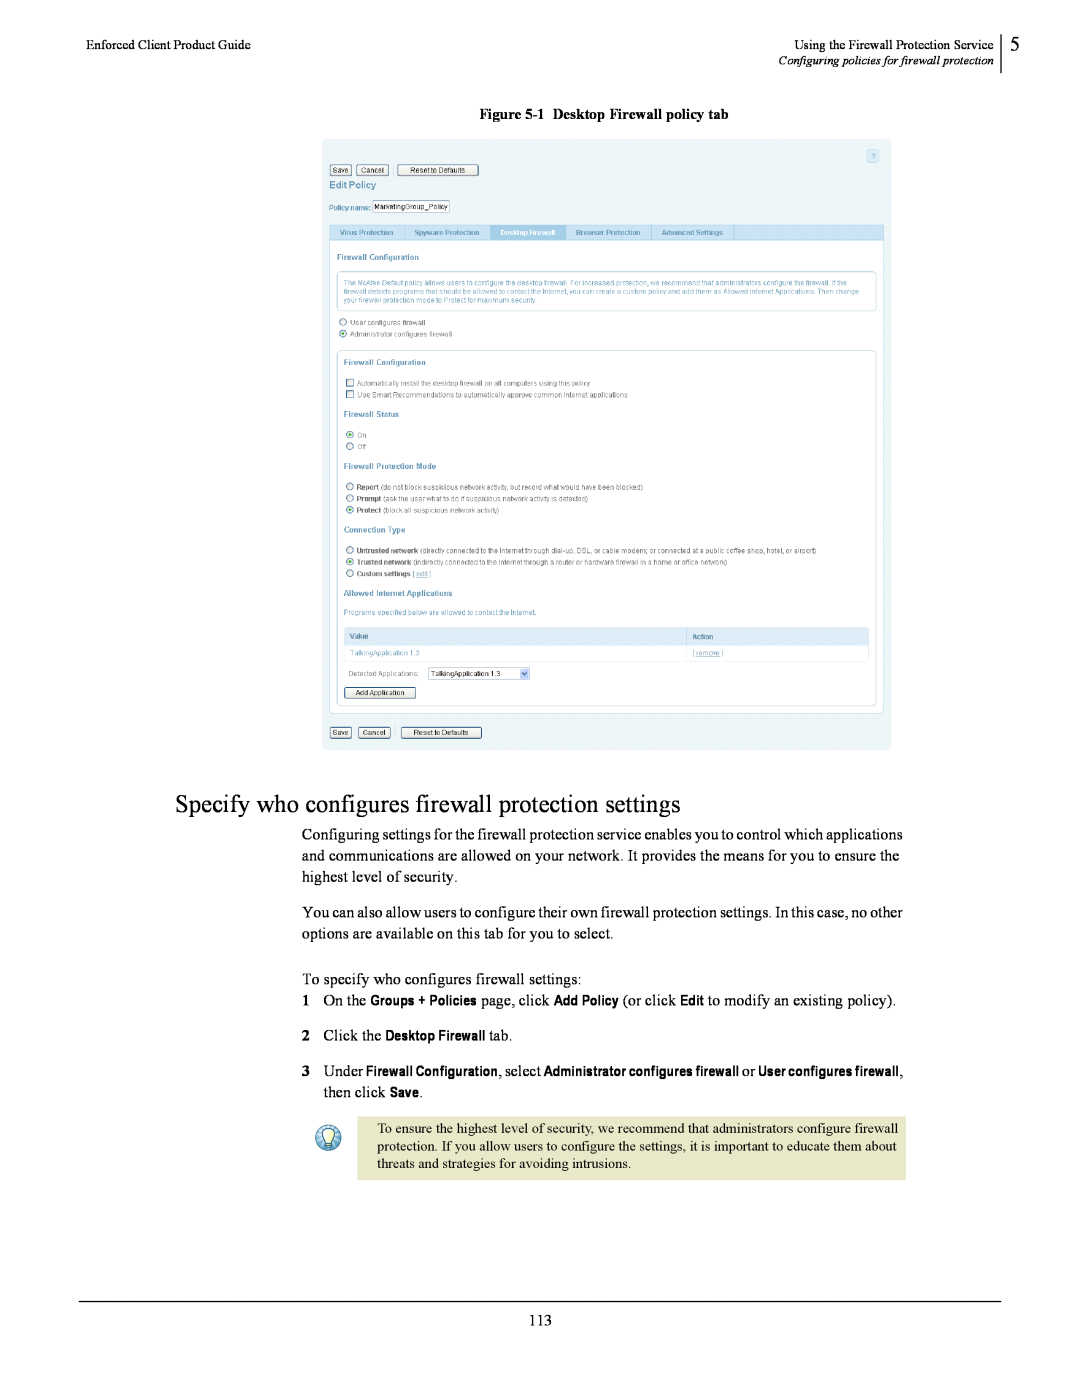 SonicWALL 4.5 manual Specify who configures firewall protection settings, 1 Desktop Firewall policy tab 